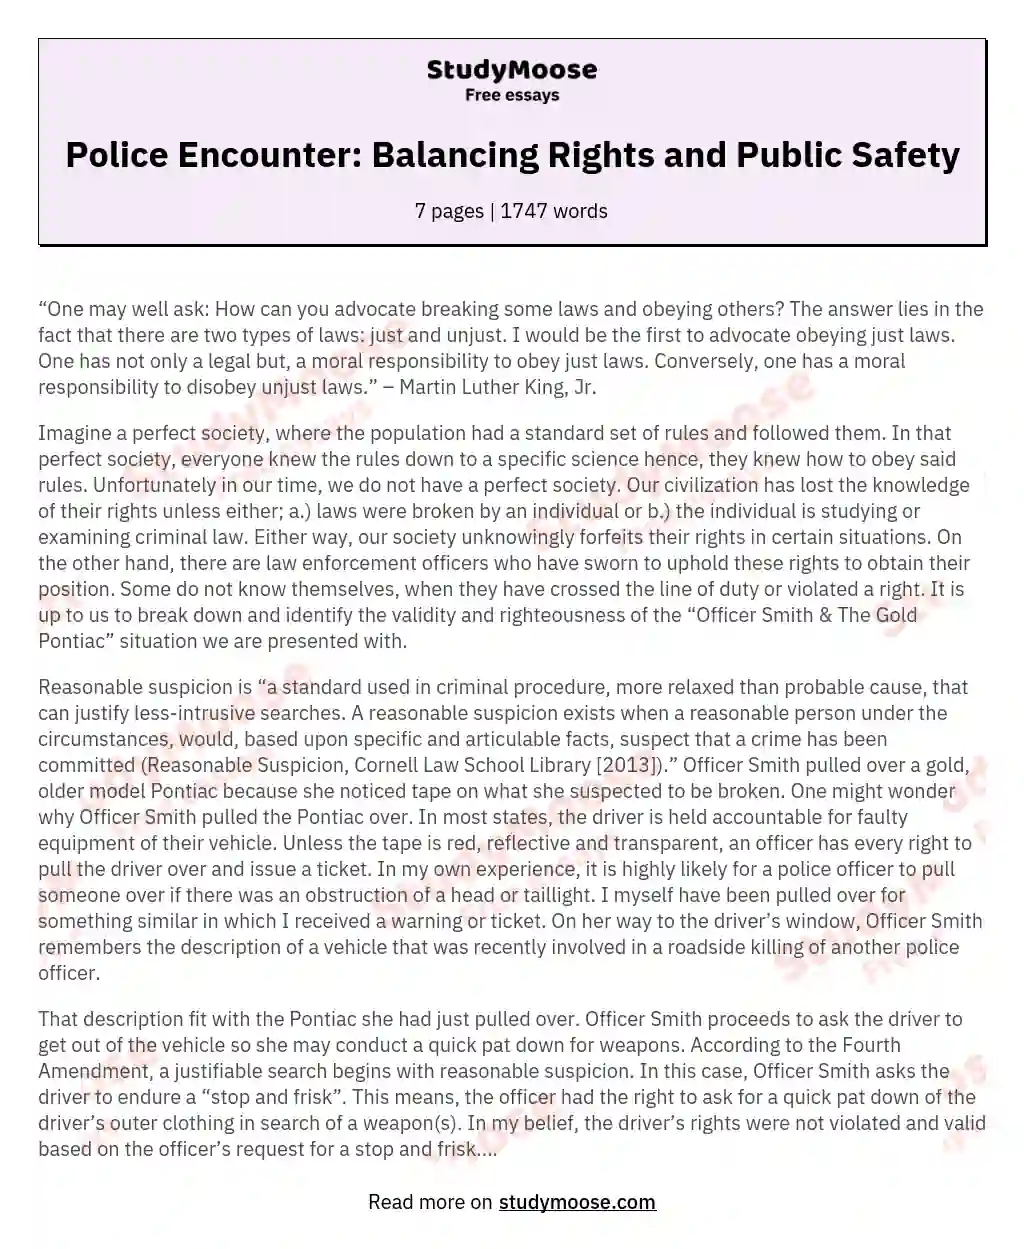 Police Encounter: Balancing Rights and Public Safety essay